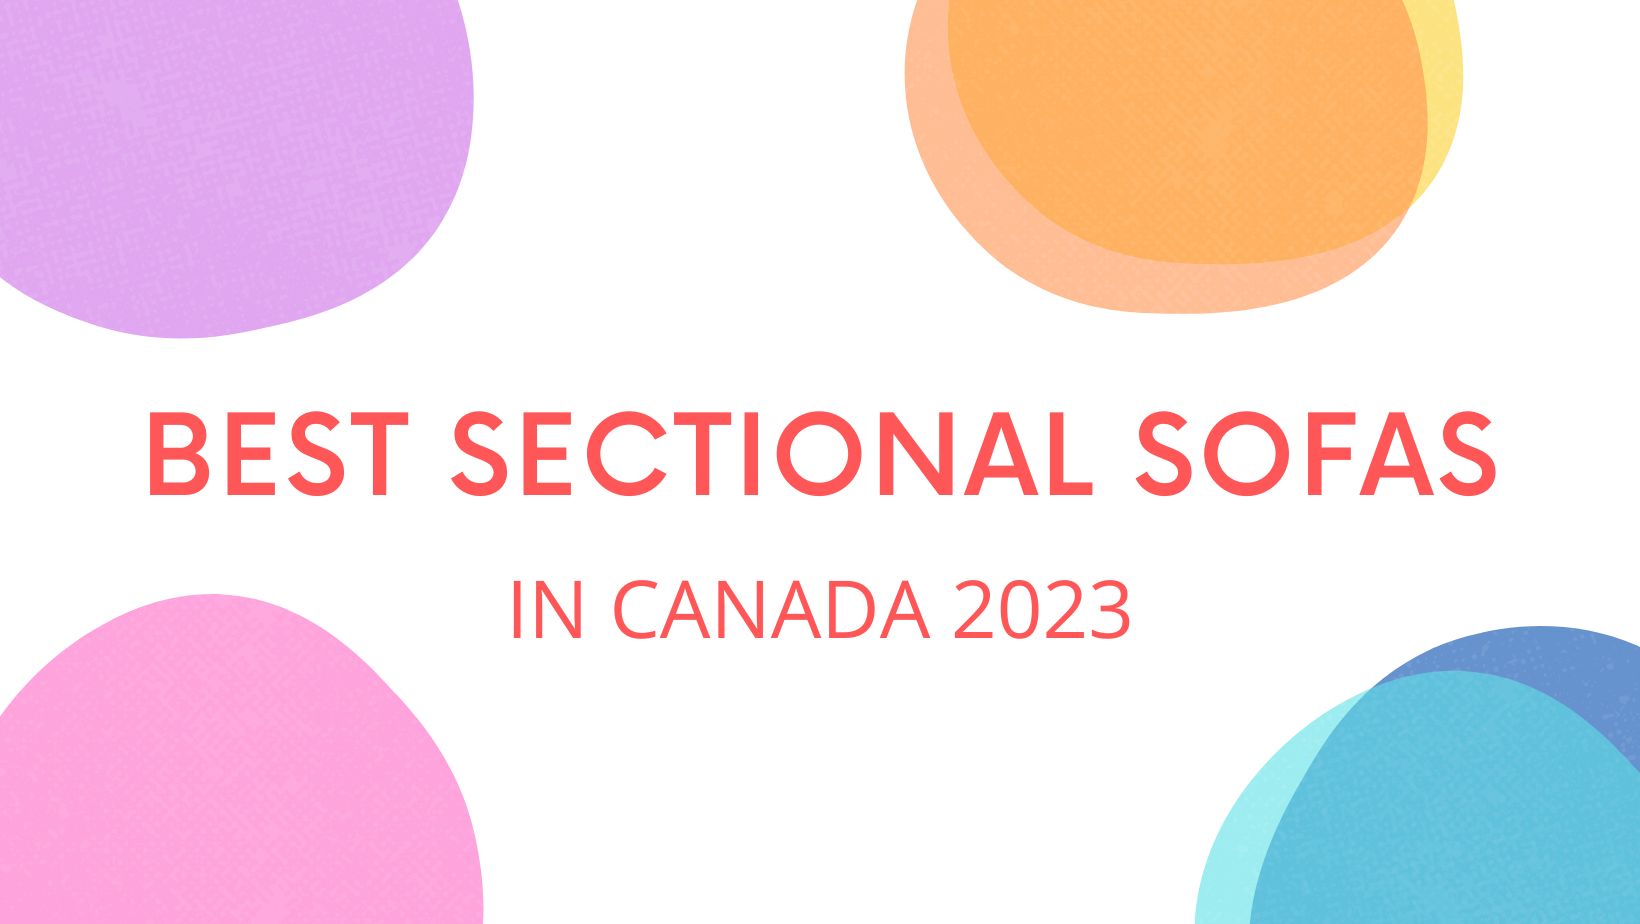 Top 5 Sectional Sofas in Canada 2023